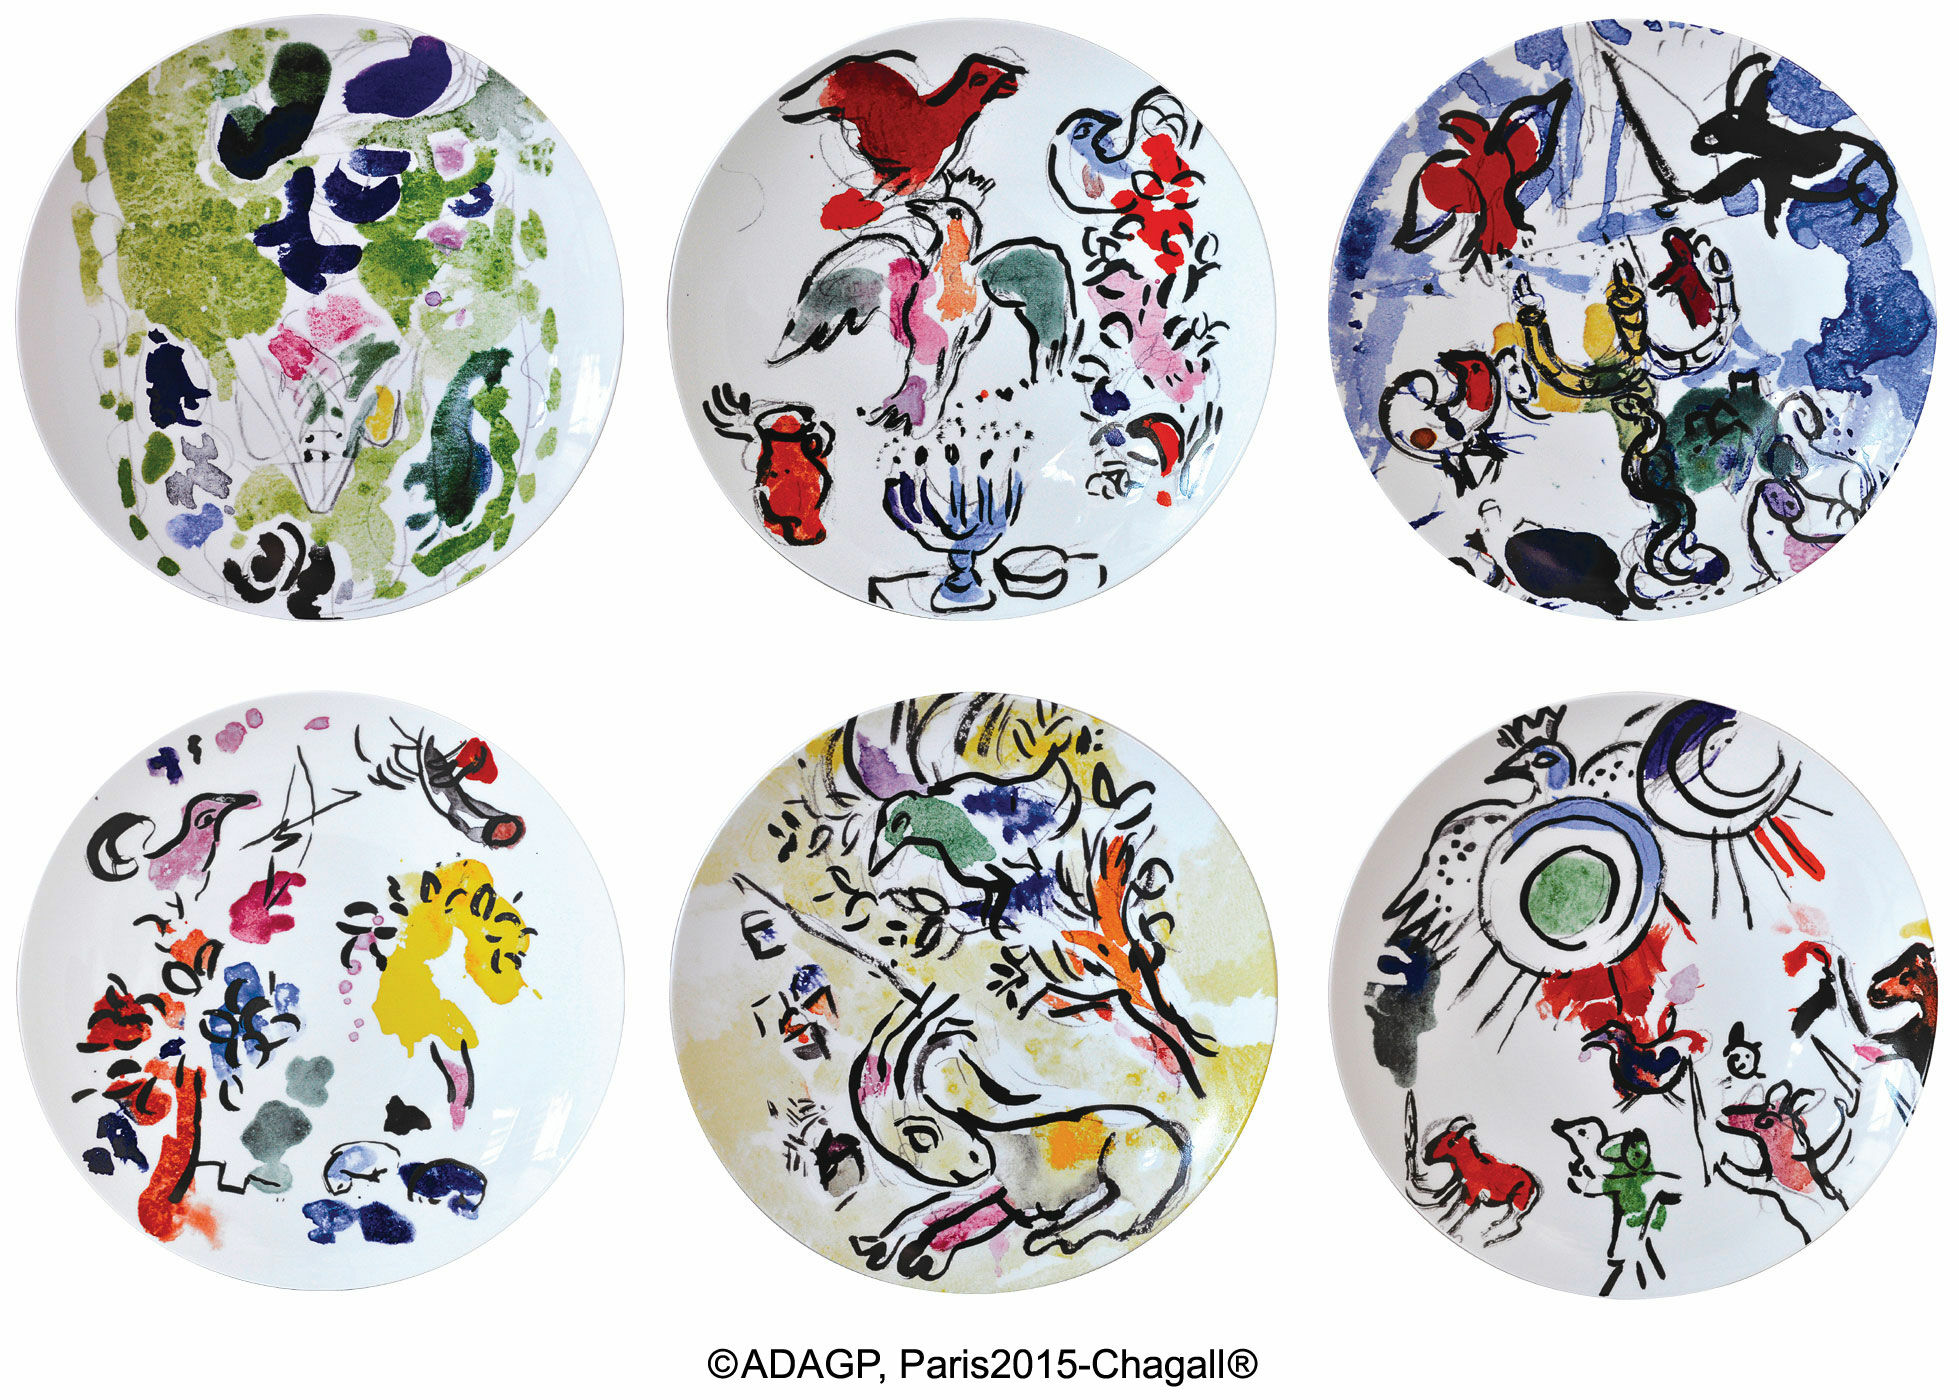 Les Vitraux d'Hadassah by Bernardaud - Set of 6 plates with artist's motifs, porcelain by Marc Chagall